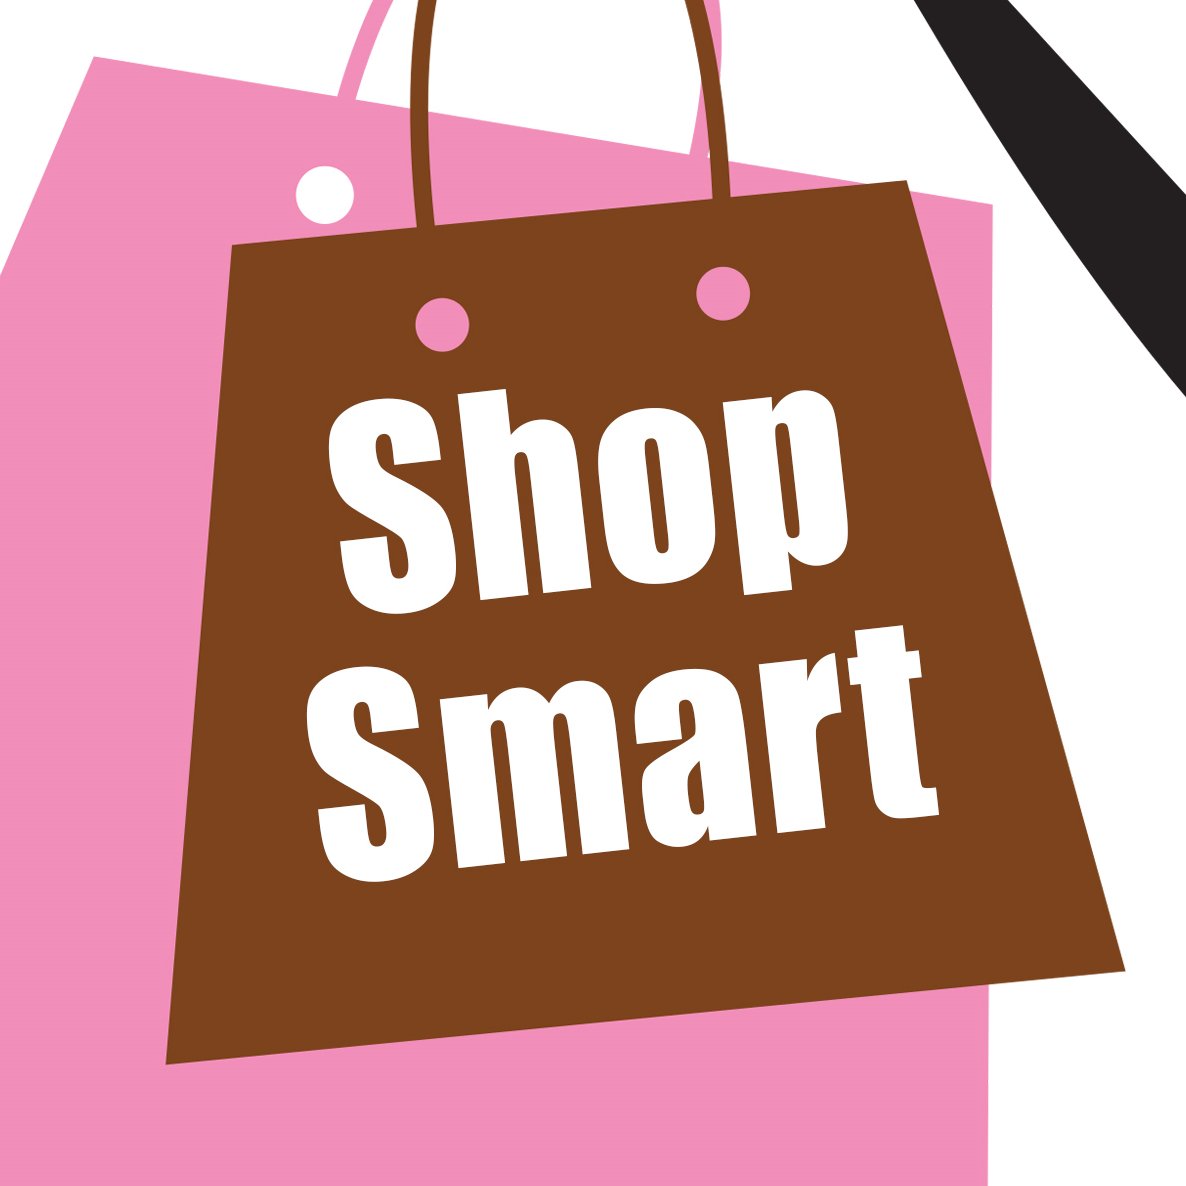 This is ShopSmart we aim to find the best deals and discounts in UK retail stores and online. Follow us for great deals and offers!